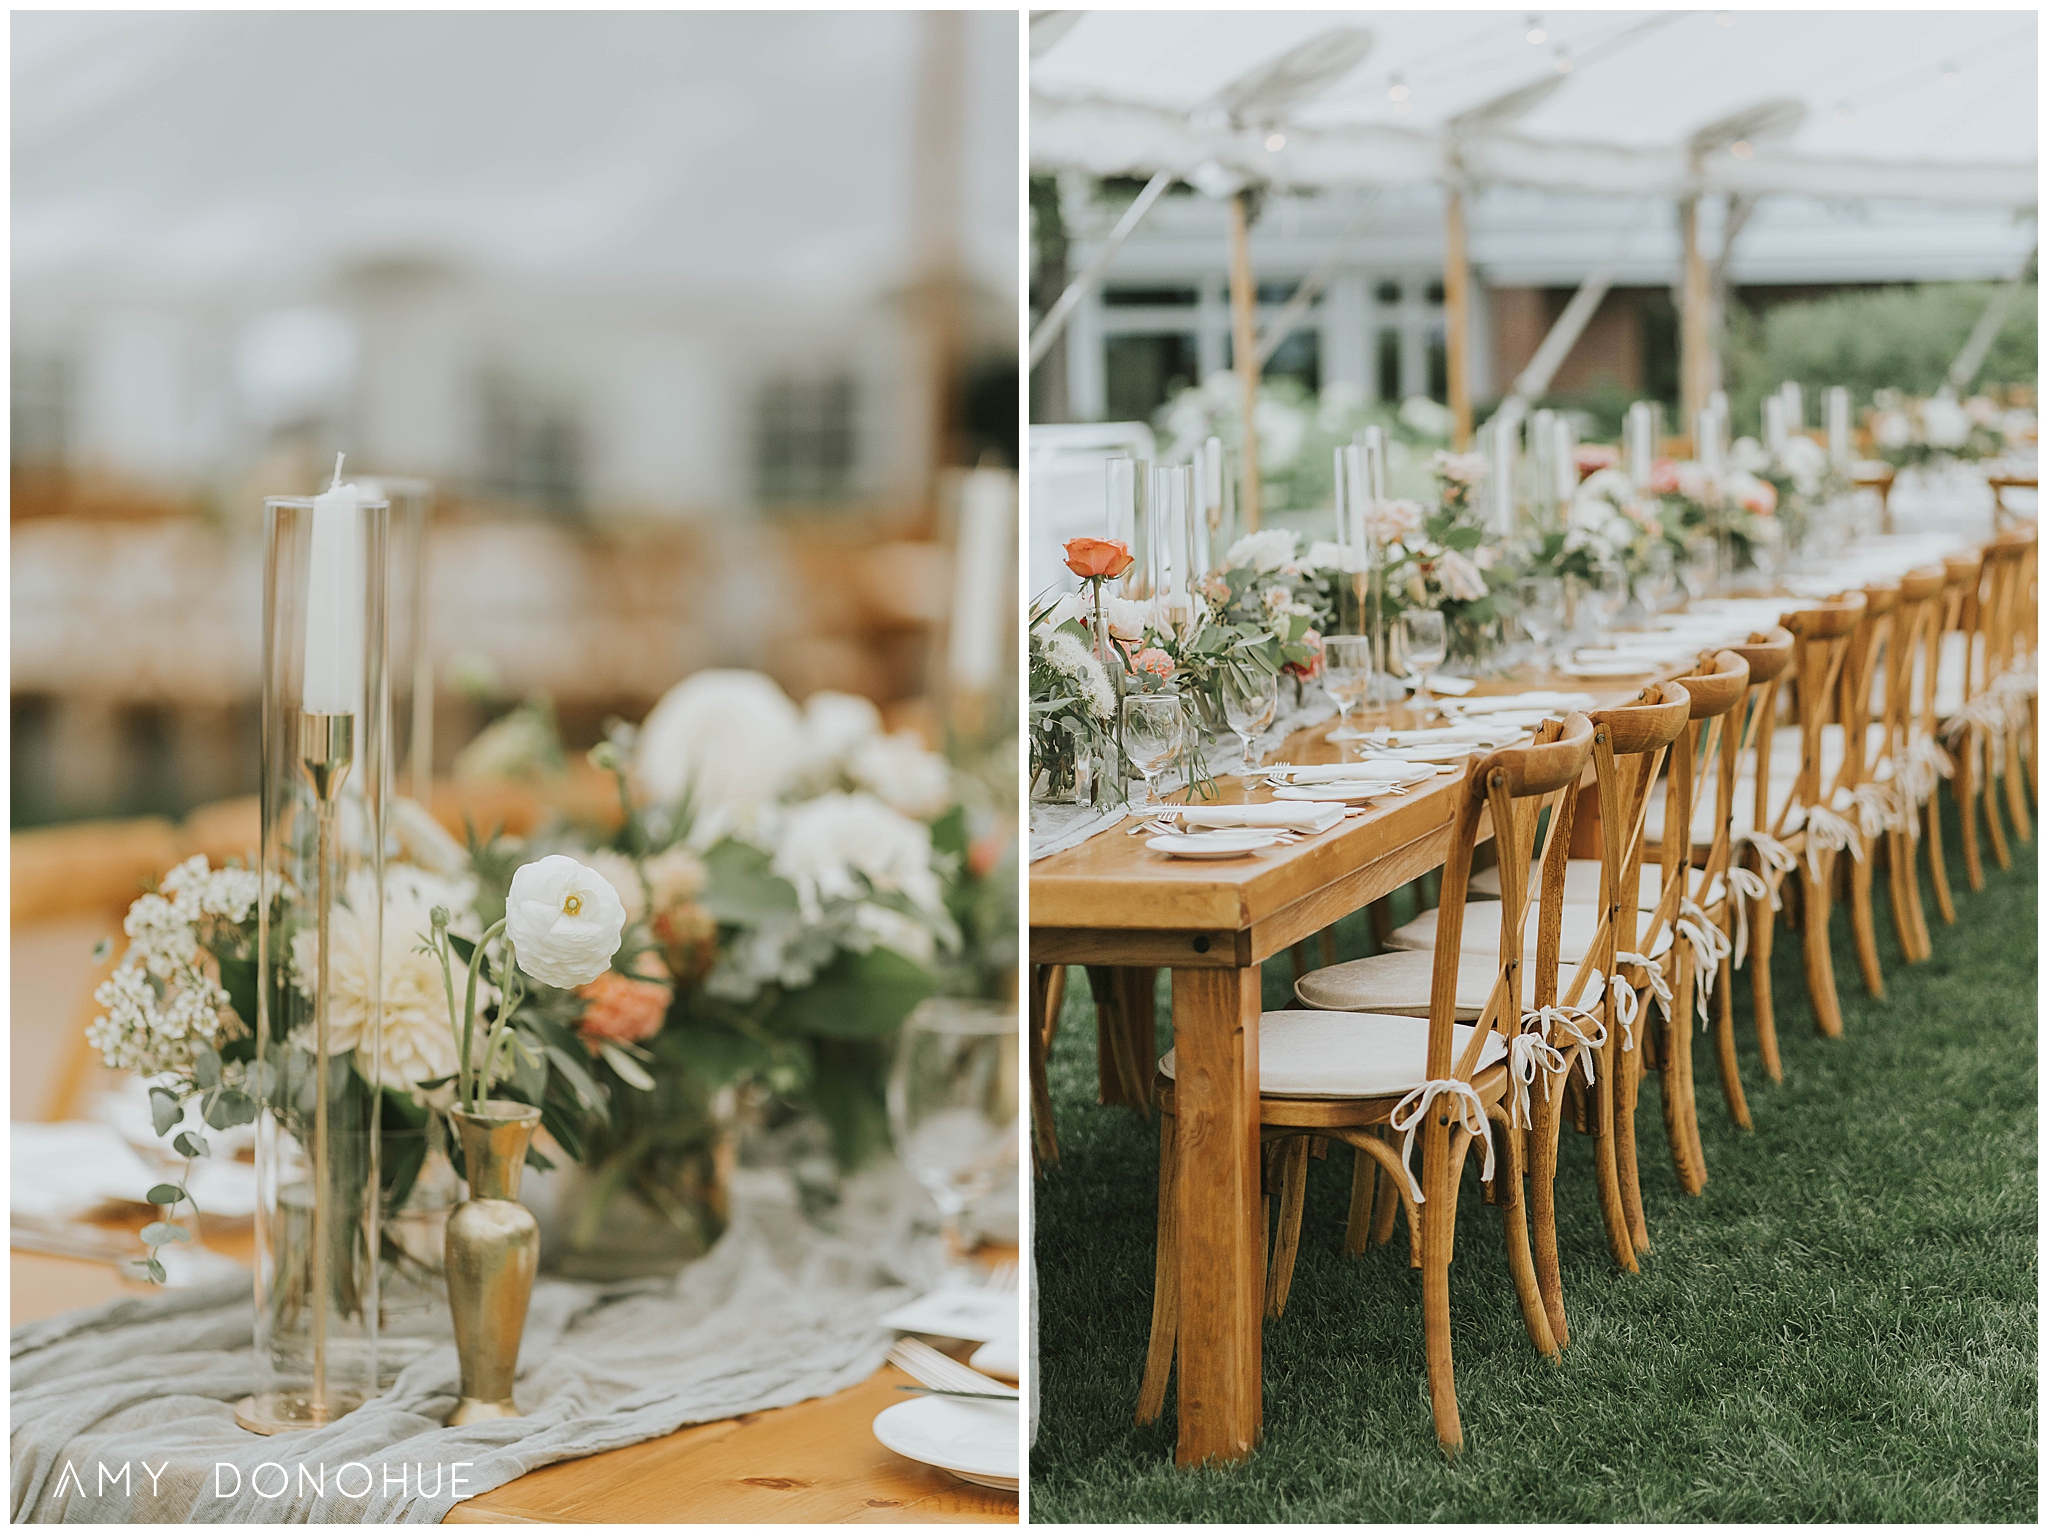 Apotheca Florals | Tent Reception on the Back Lawn | Woodstock Inn & Resort | Vermont Wedding Photographer | © Amy Donohue Photography